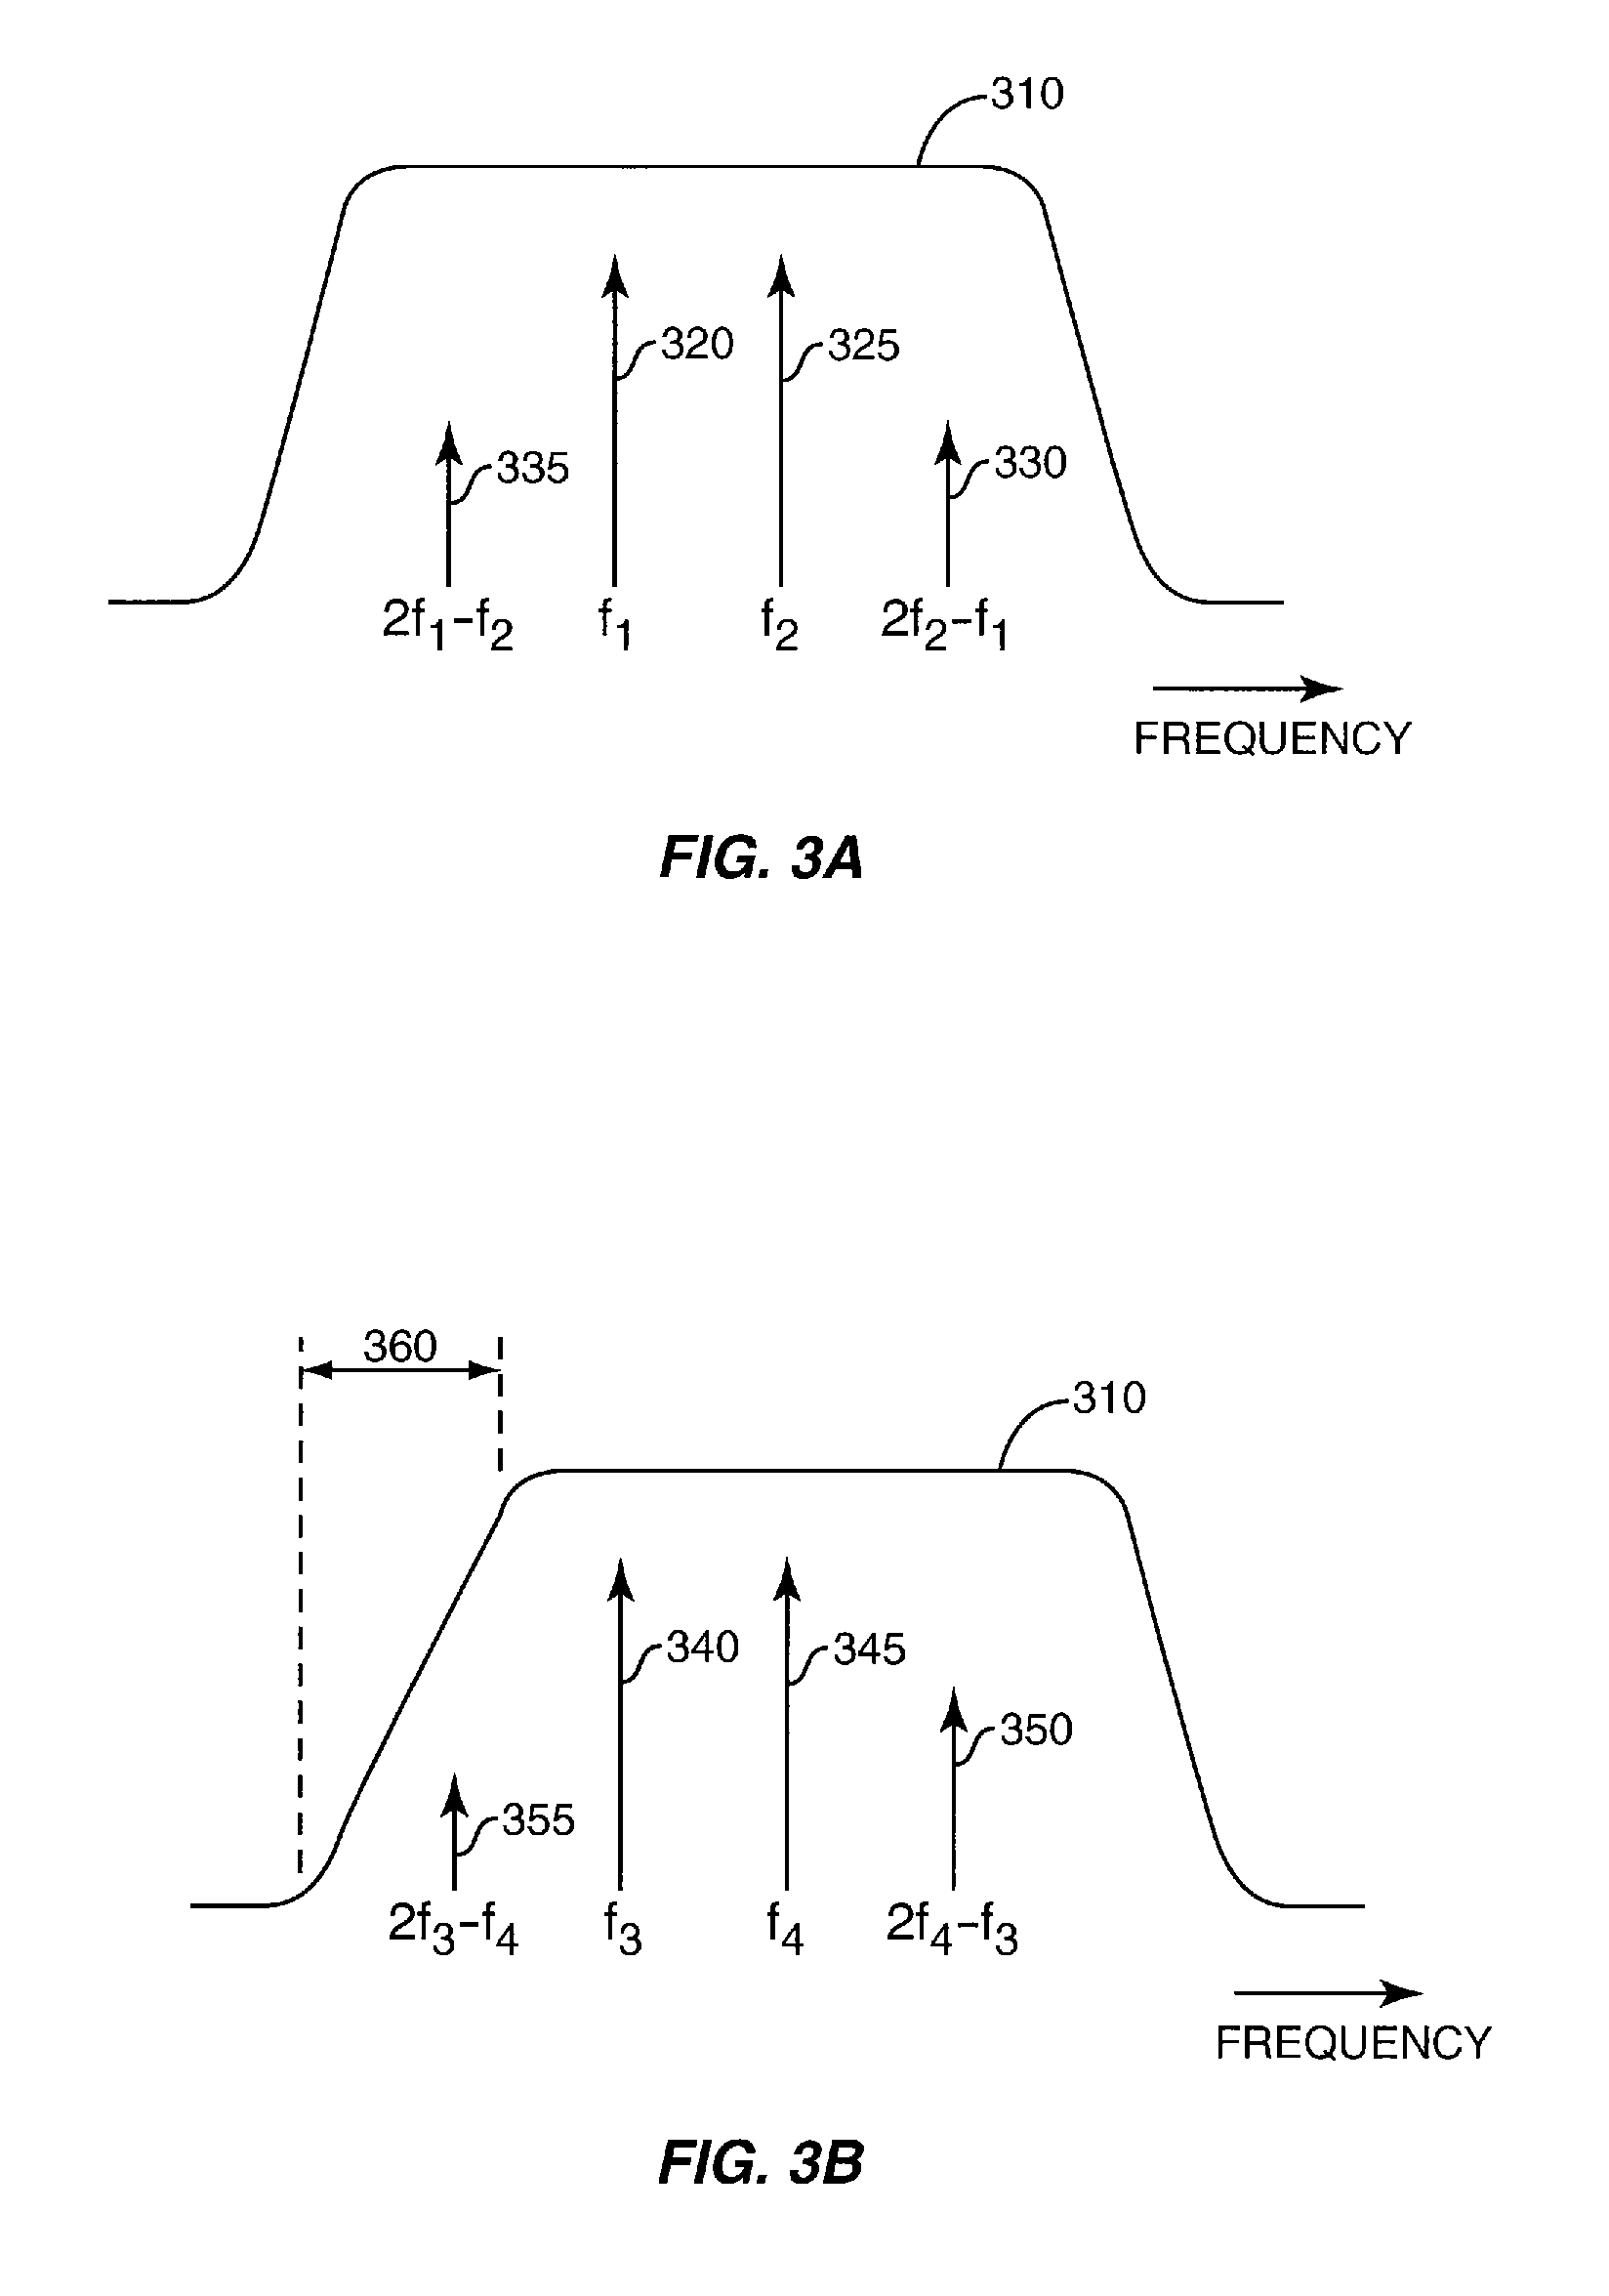 Method and apparatus for remote detection of radio-frequency devices